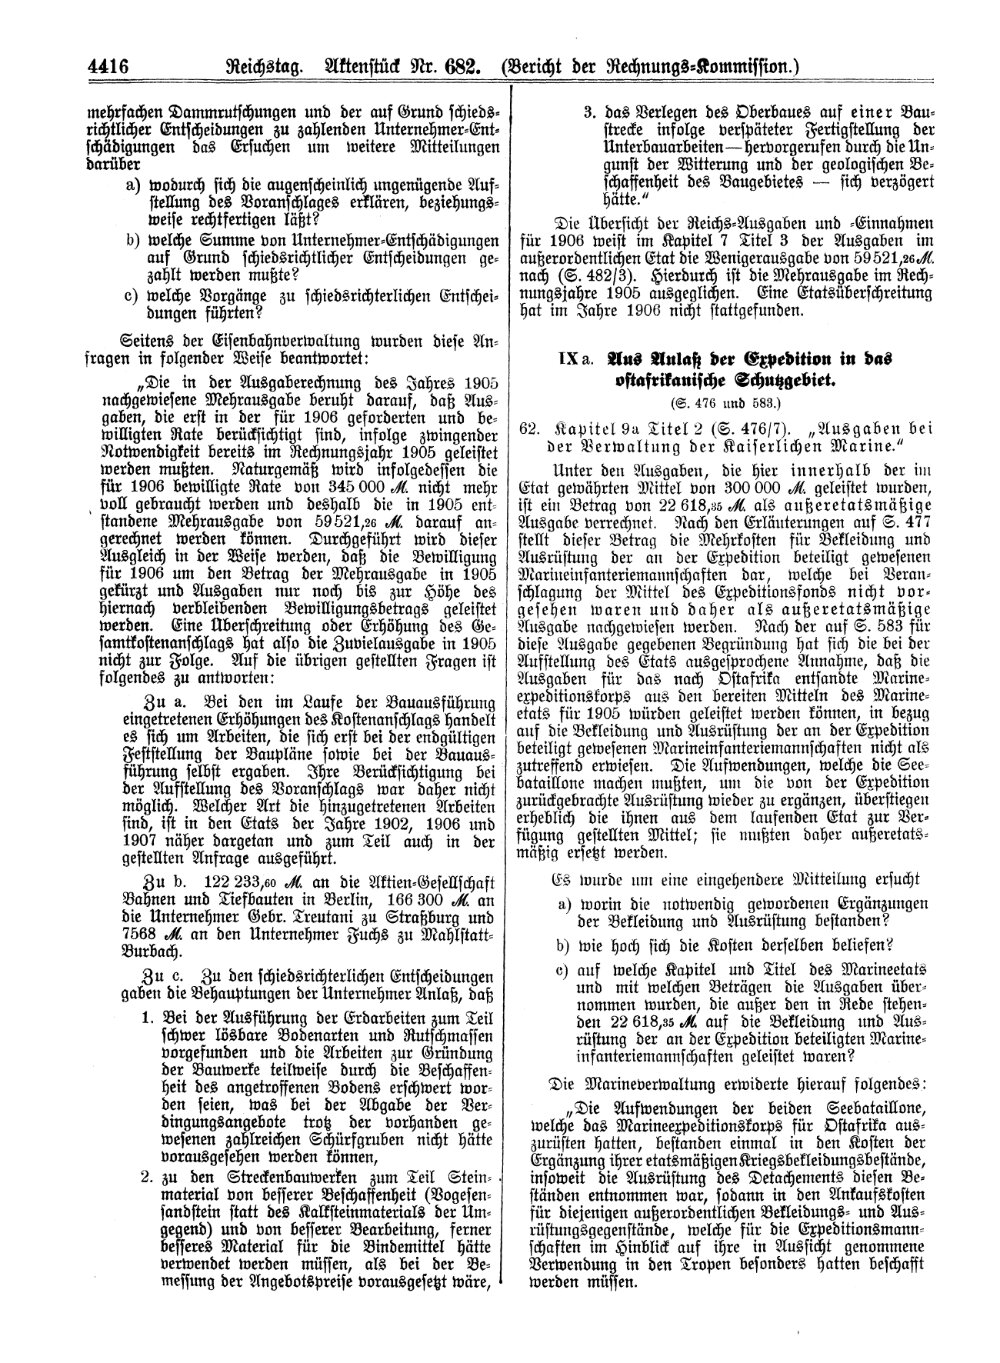 Scan of page 4416